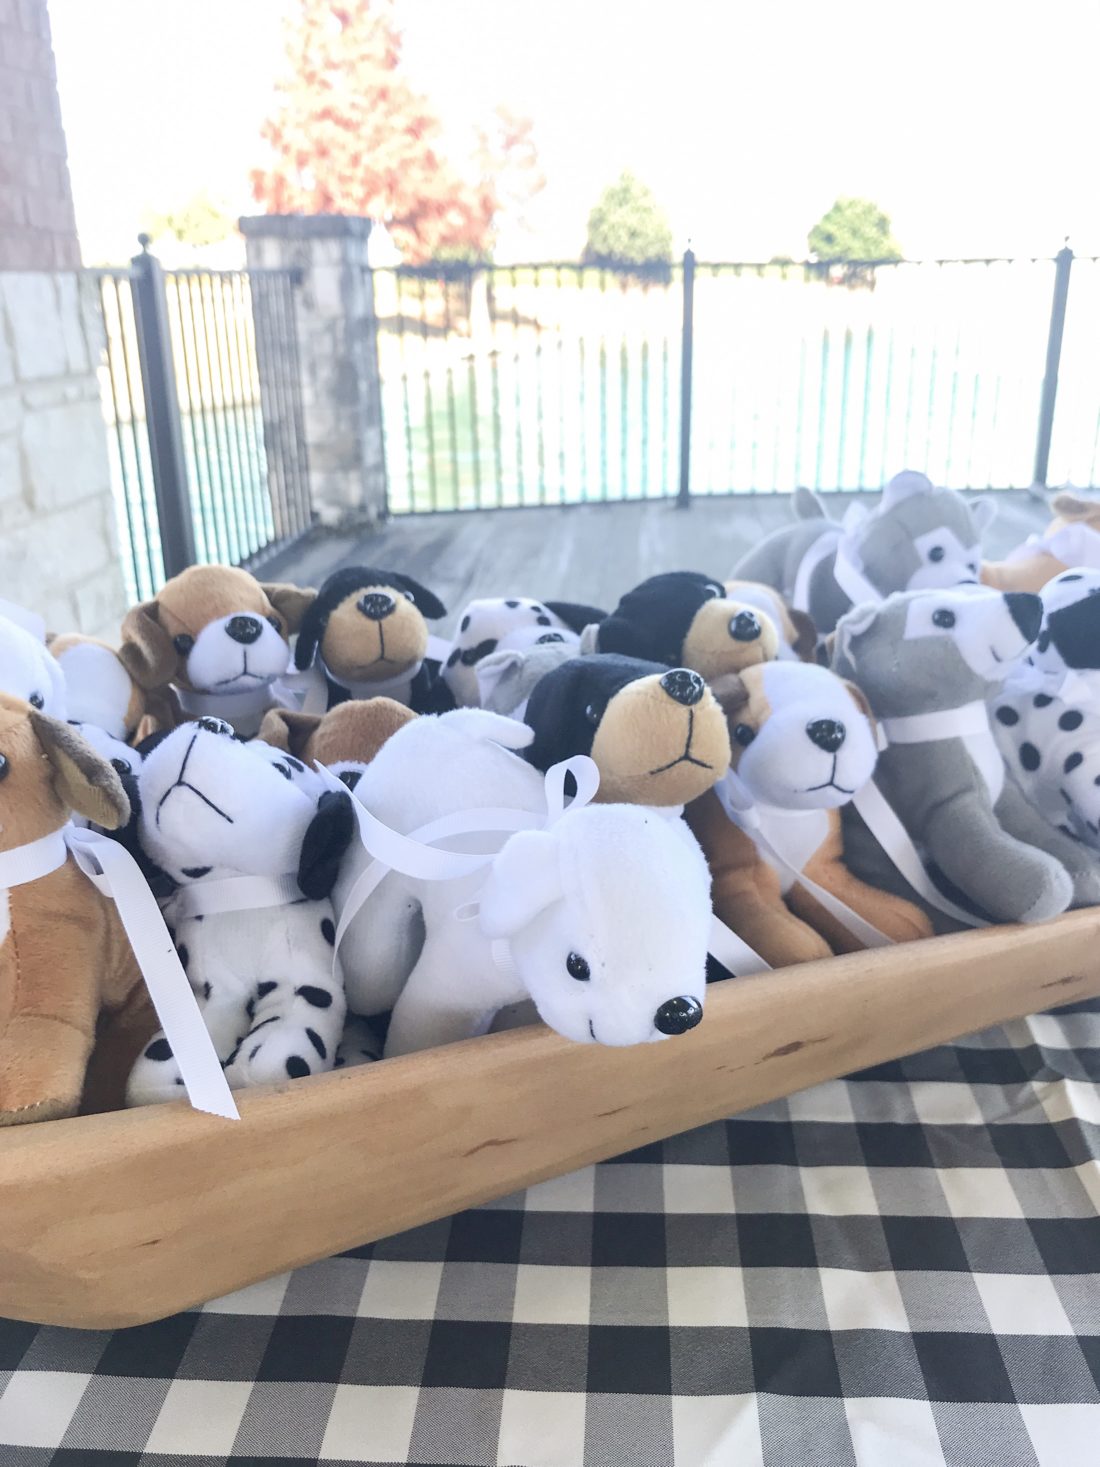 puppy dog themed birthday party favors, adopt a puppy, stuffed puppy dogs